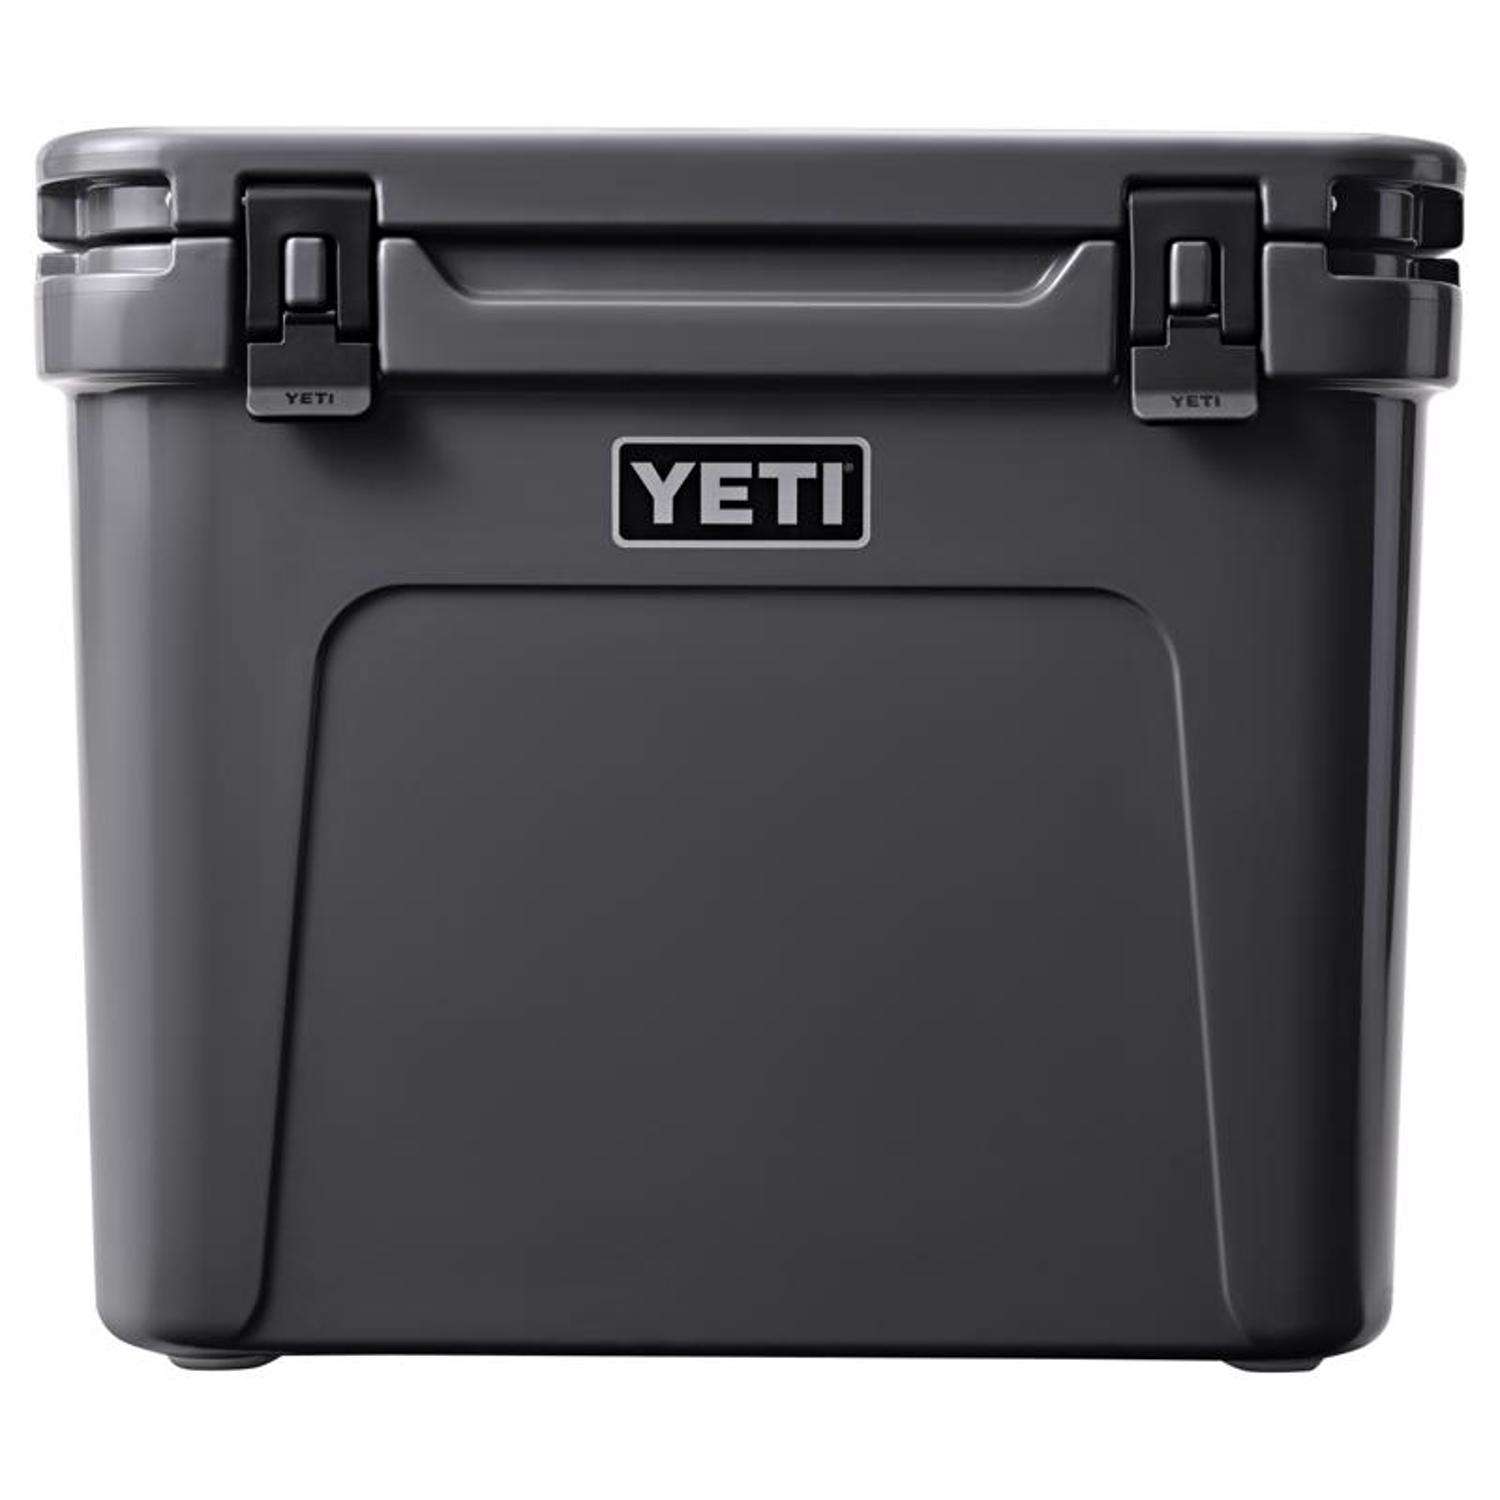 Yeti Tundra 45 Canopy GREEN Cooler -HULK!! Awesome SOLD OUT!! New With Tag - LIME